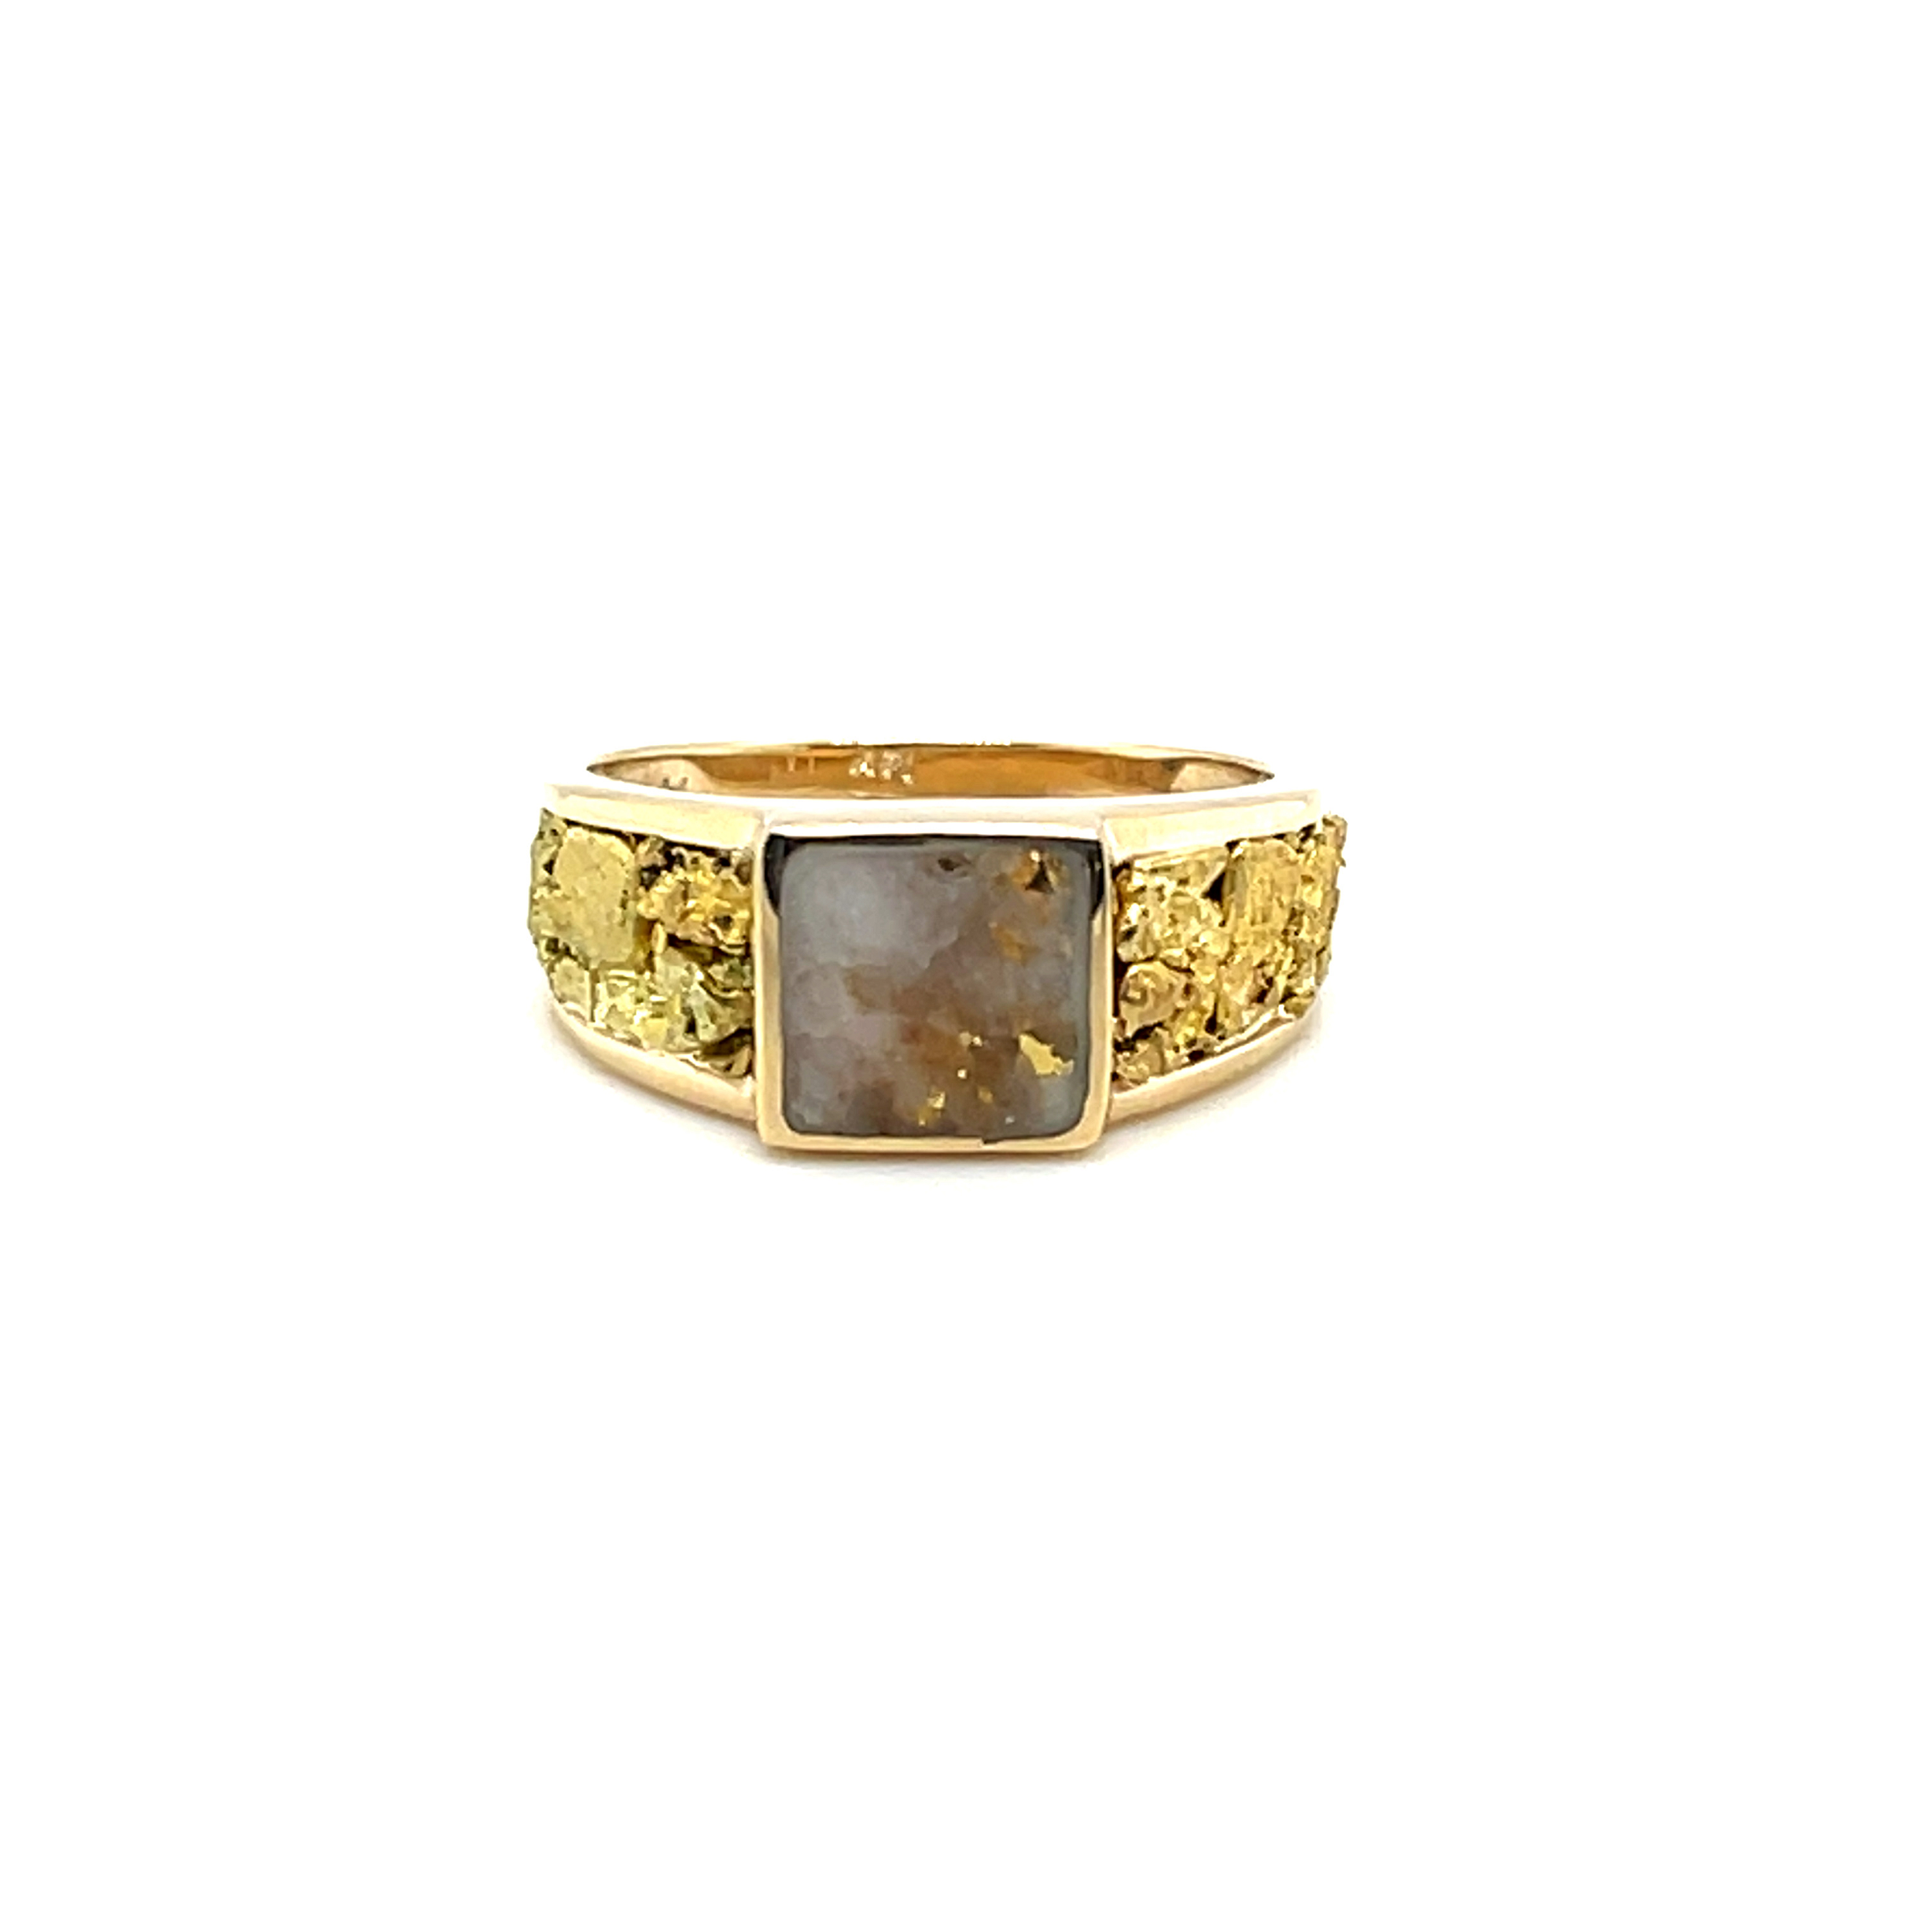 14k YG w/ Quare Gold Quartz and Gold Nugget Ring by Peter Fisher